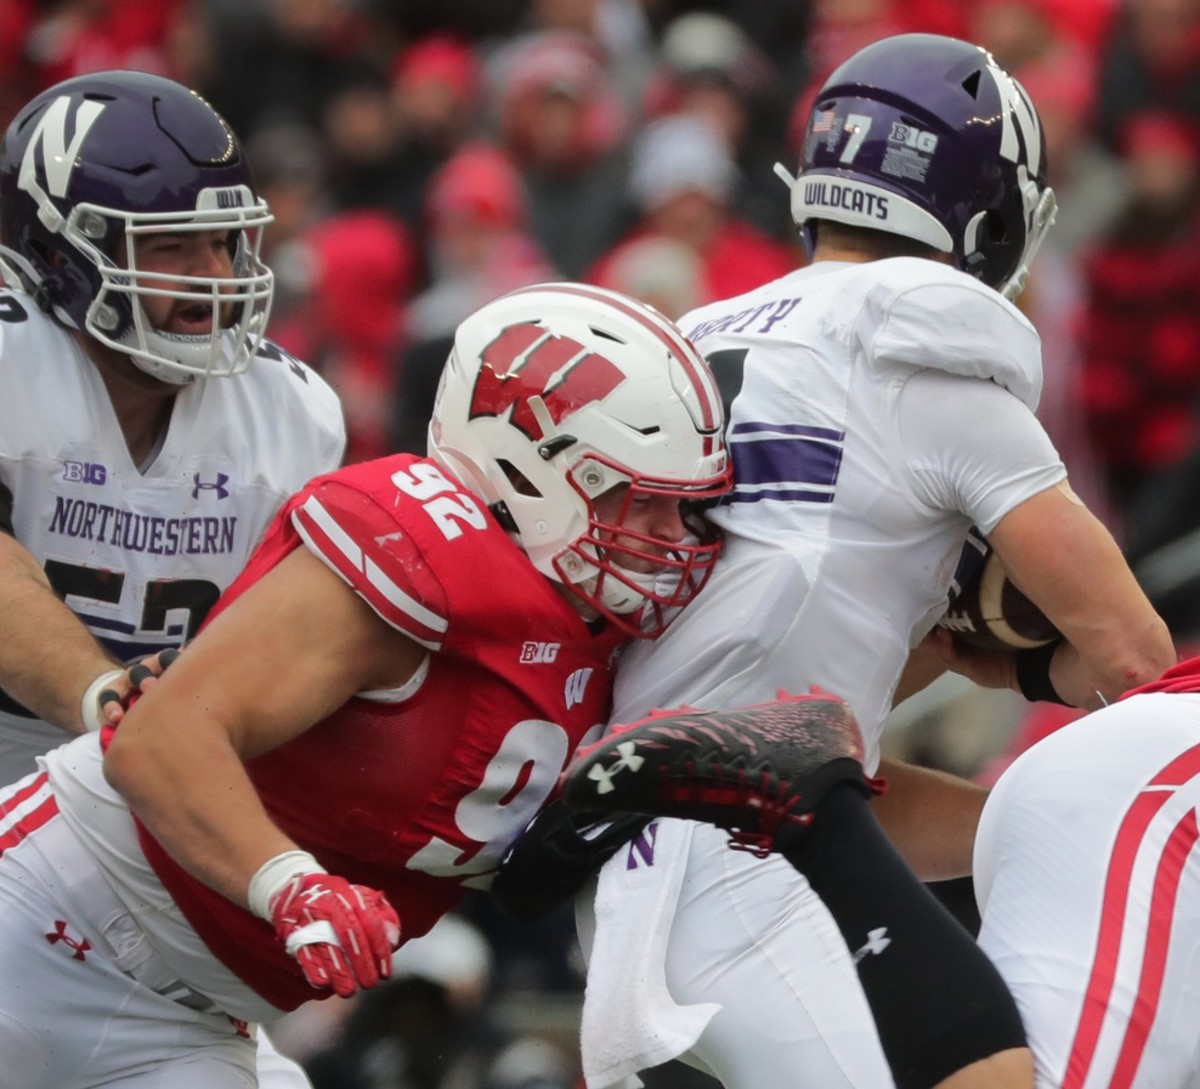 Wisconsin defensive end Matt Henningsen (92) sacks Northwestern quarterback Andrew Marty (7) during the second quarter of their game on Saturday, November 13, 2021 at Camp Randall Stadium in Madison, Wis. Wisconsin beat Northwestern 35-7.